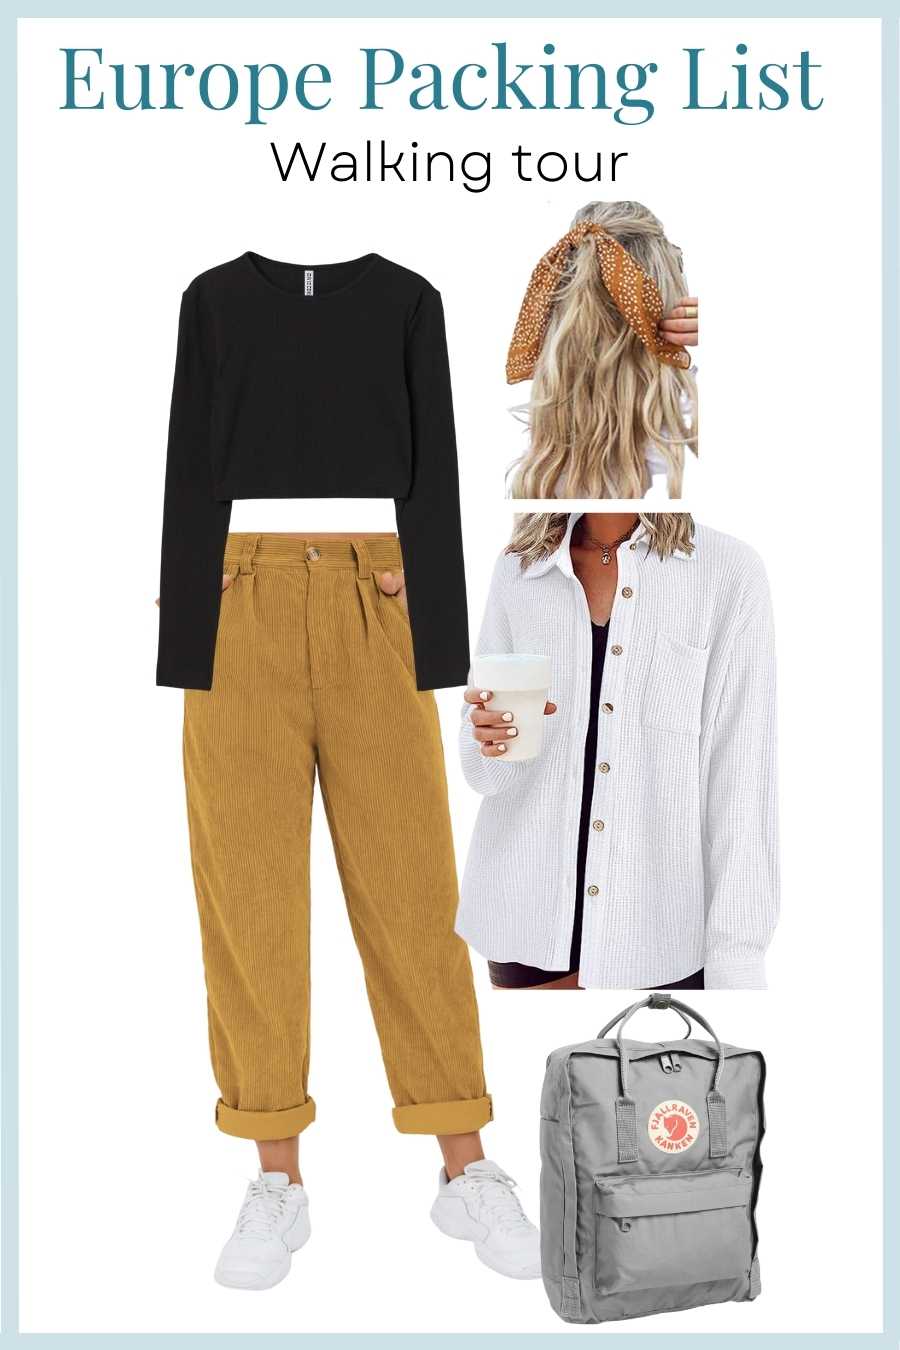 Spring in Europe packing list walking tour outfit